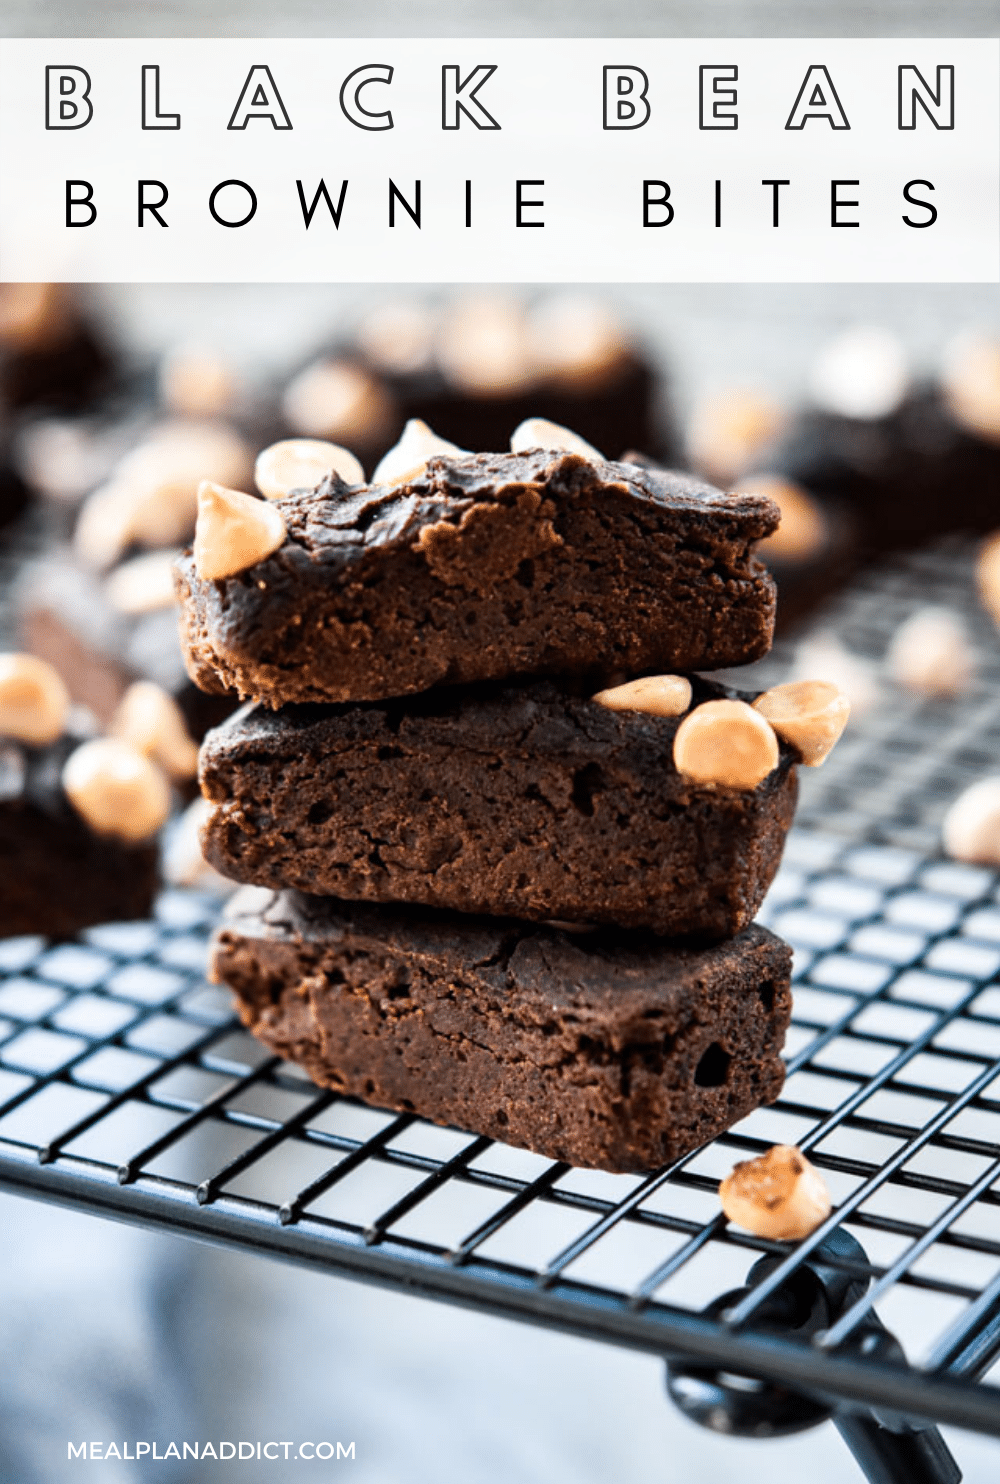 Brownie bites pin for Pinterest